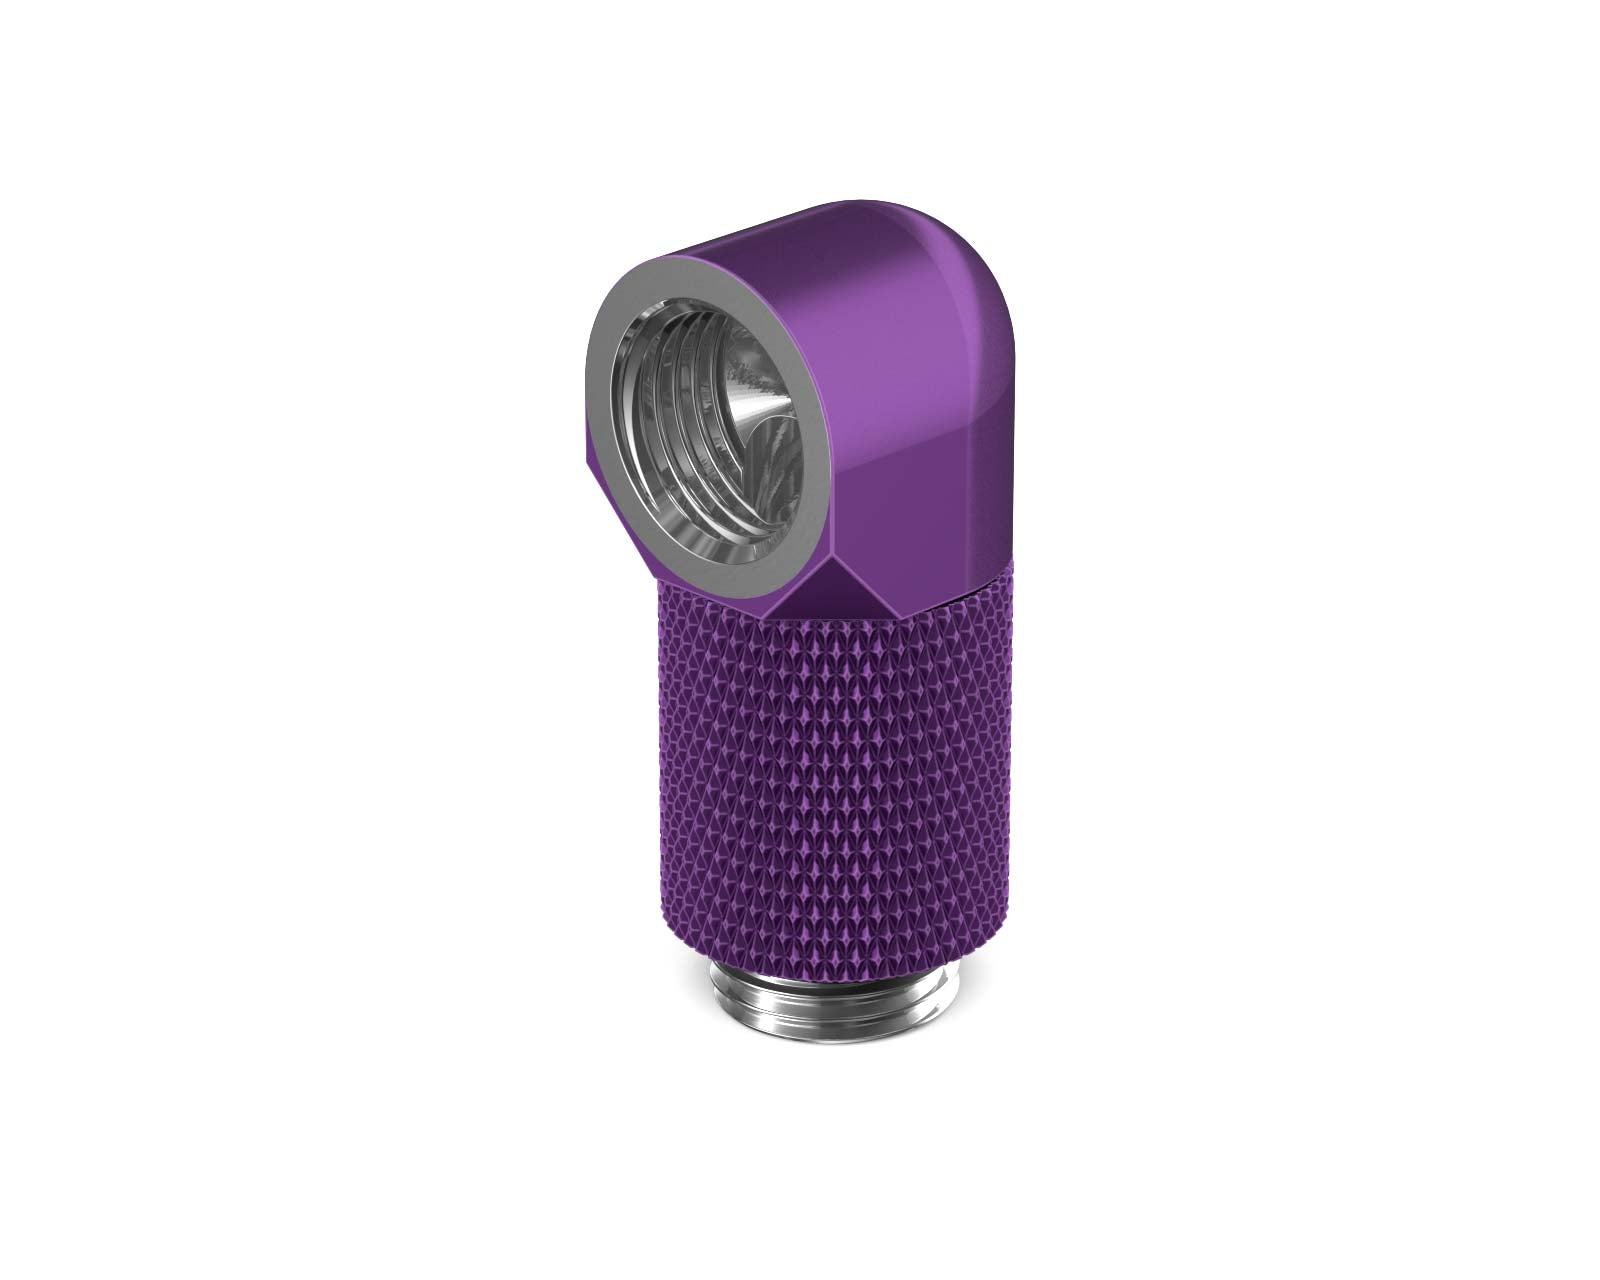 PrimoChill Male to Female G 1/4in. 90 Degree SX Rotary 20mm Extension Elbow Fitting - PrimoChill - KEEPING IT COOL Candy Purple